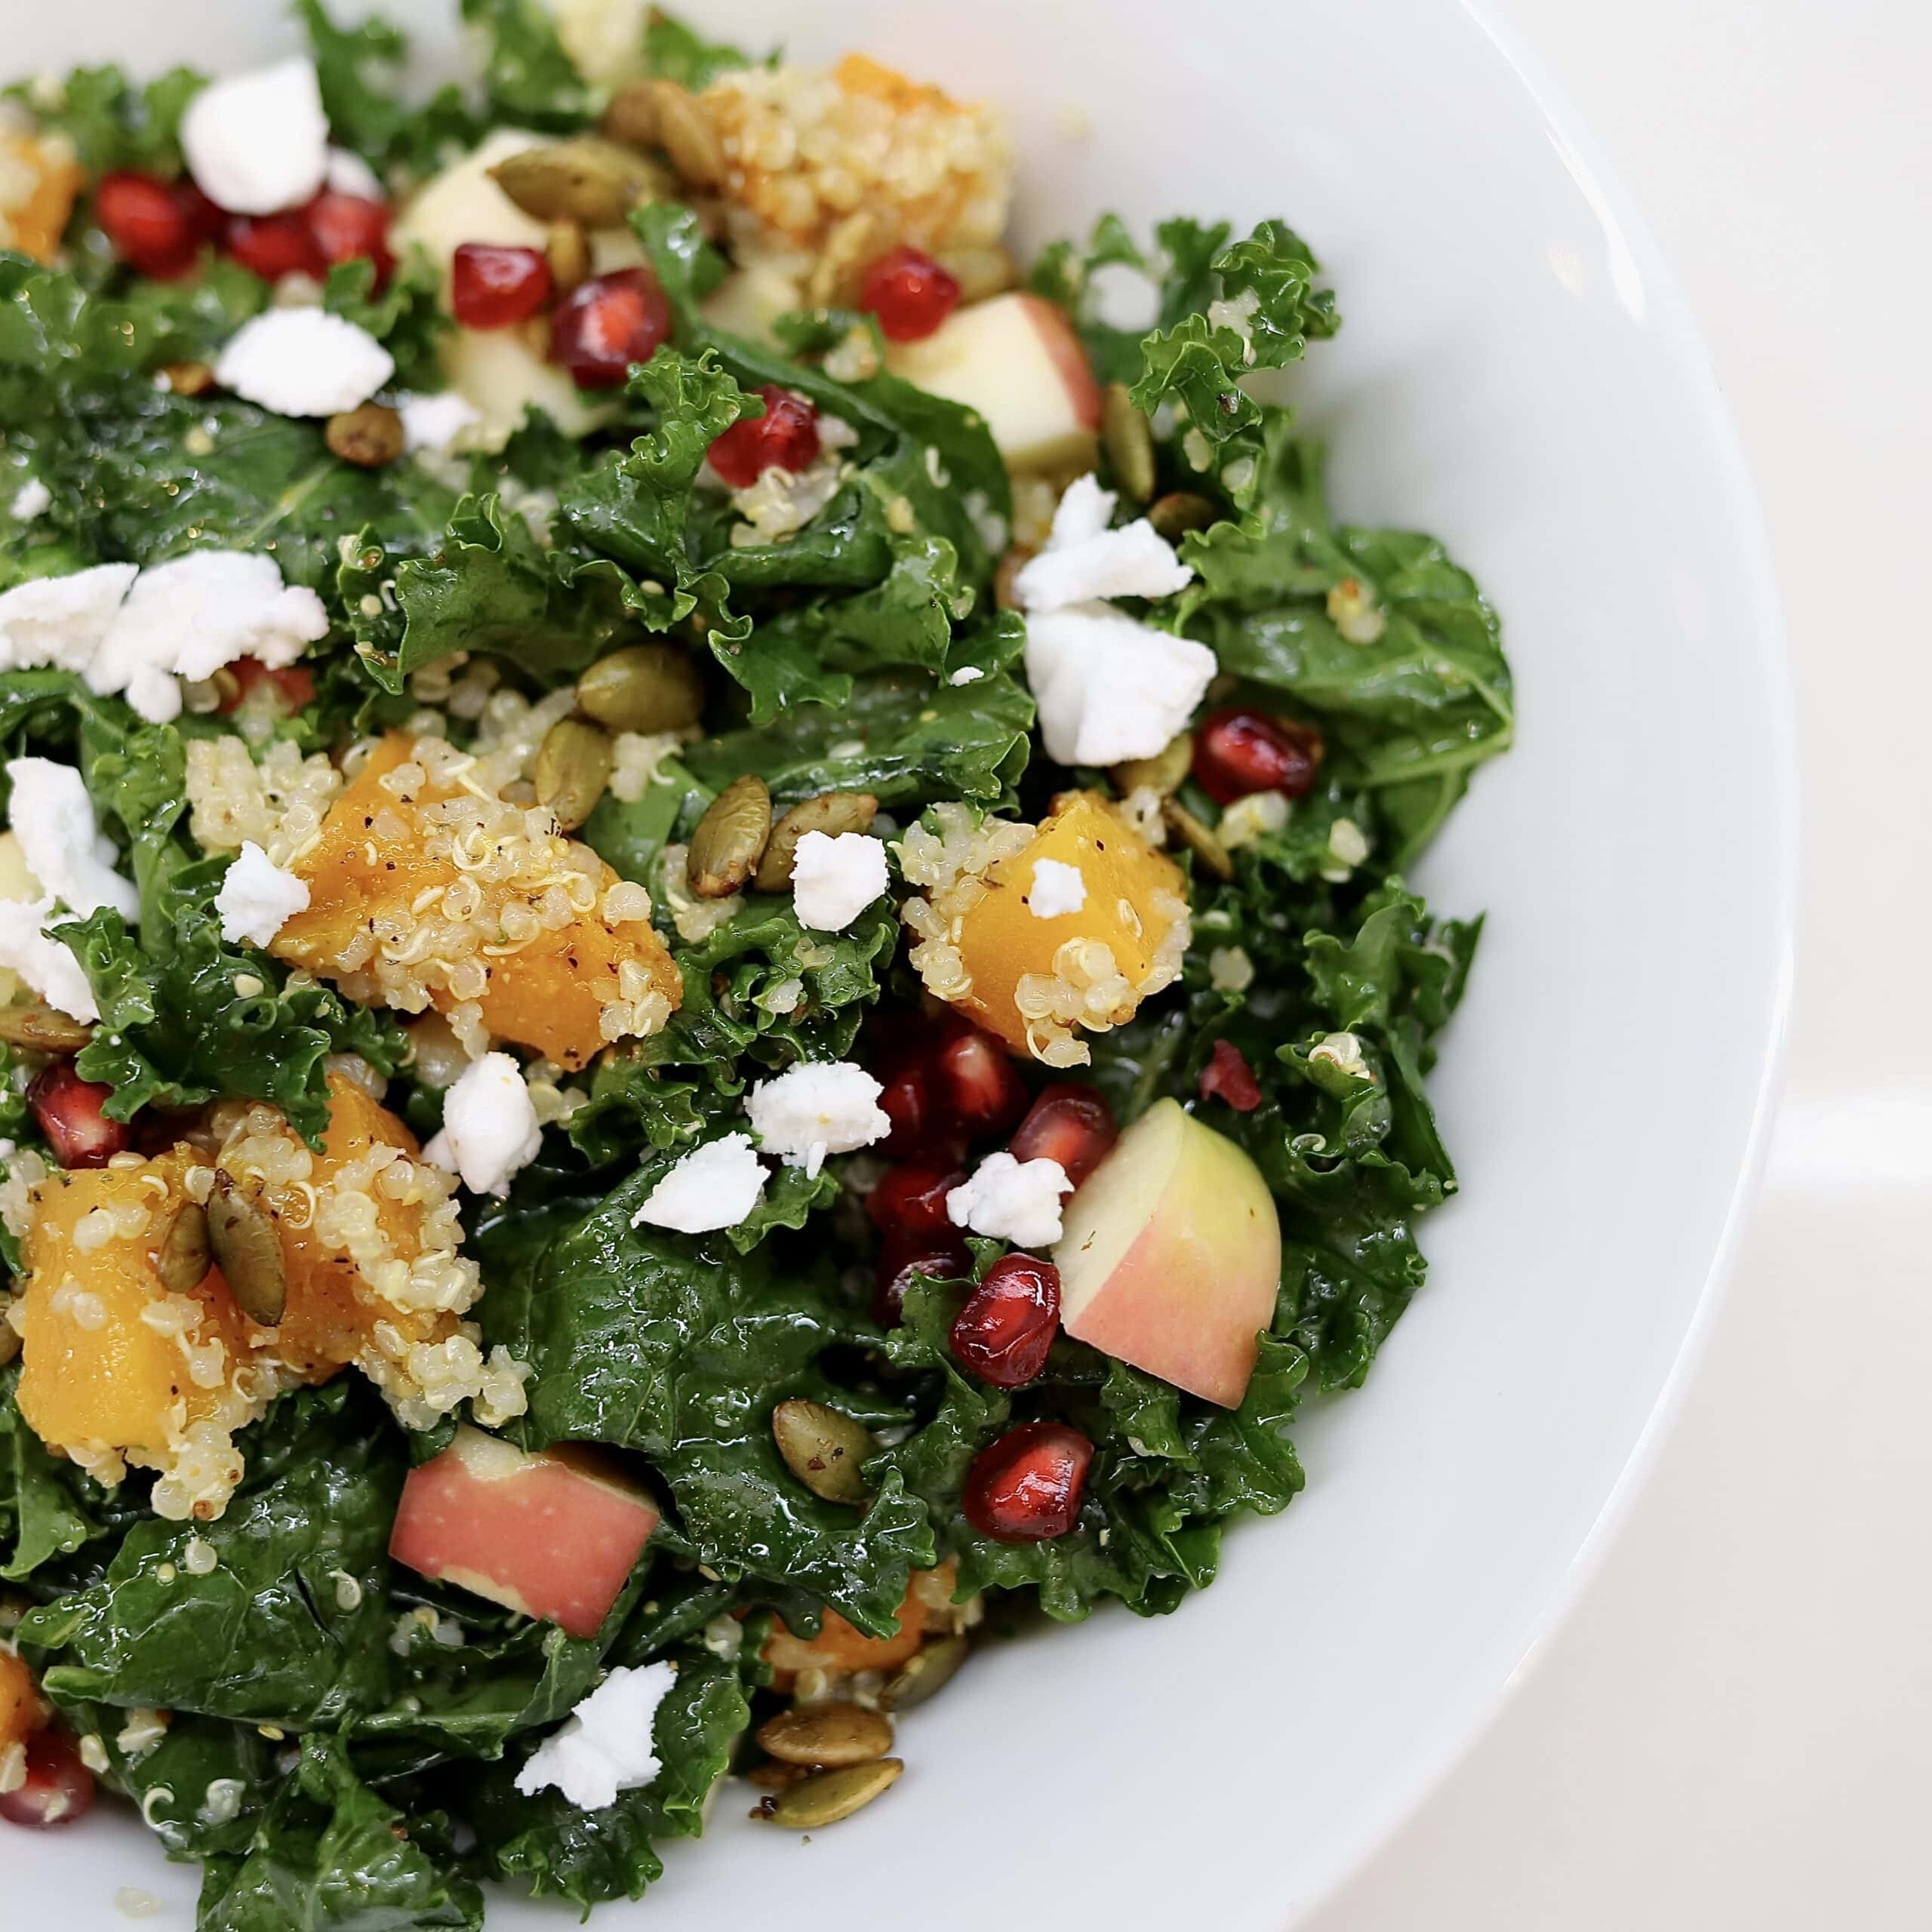 Fall Harvest Salad With Quinoa And Butternut Squash - Purfect Sunday